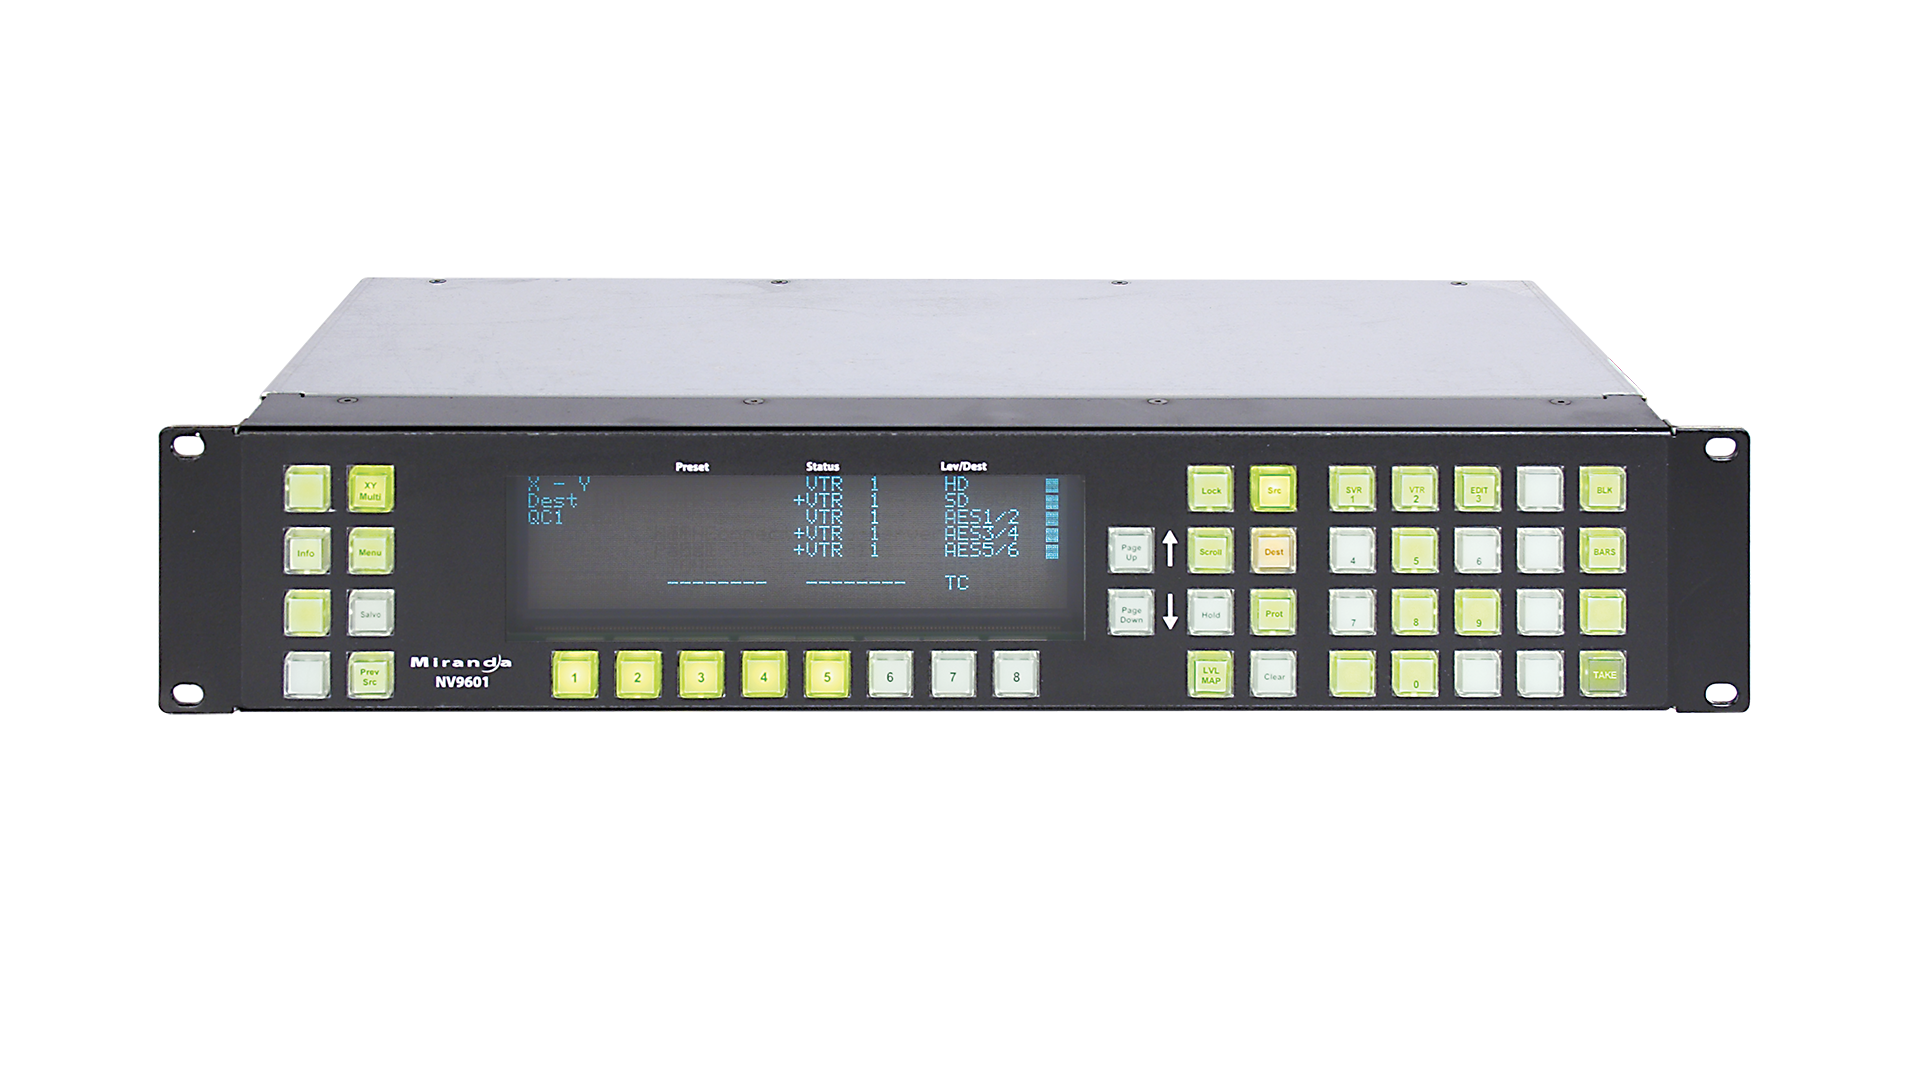 NVision NV9601 XY Control Panel for NVision Router w/ Power Cord 